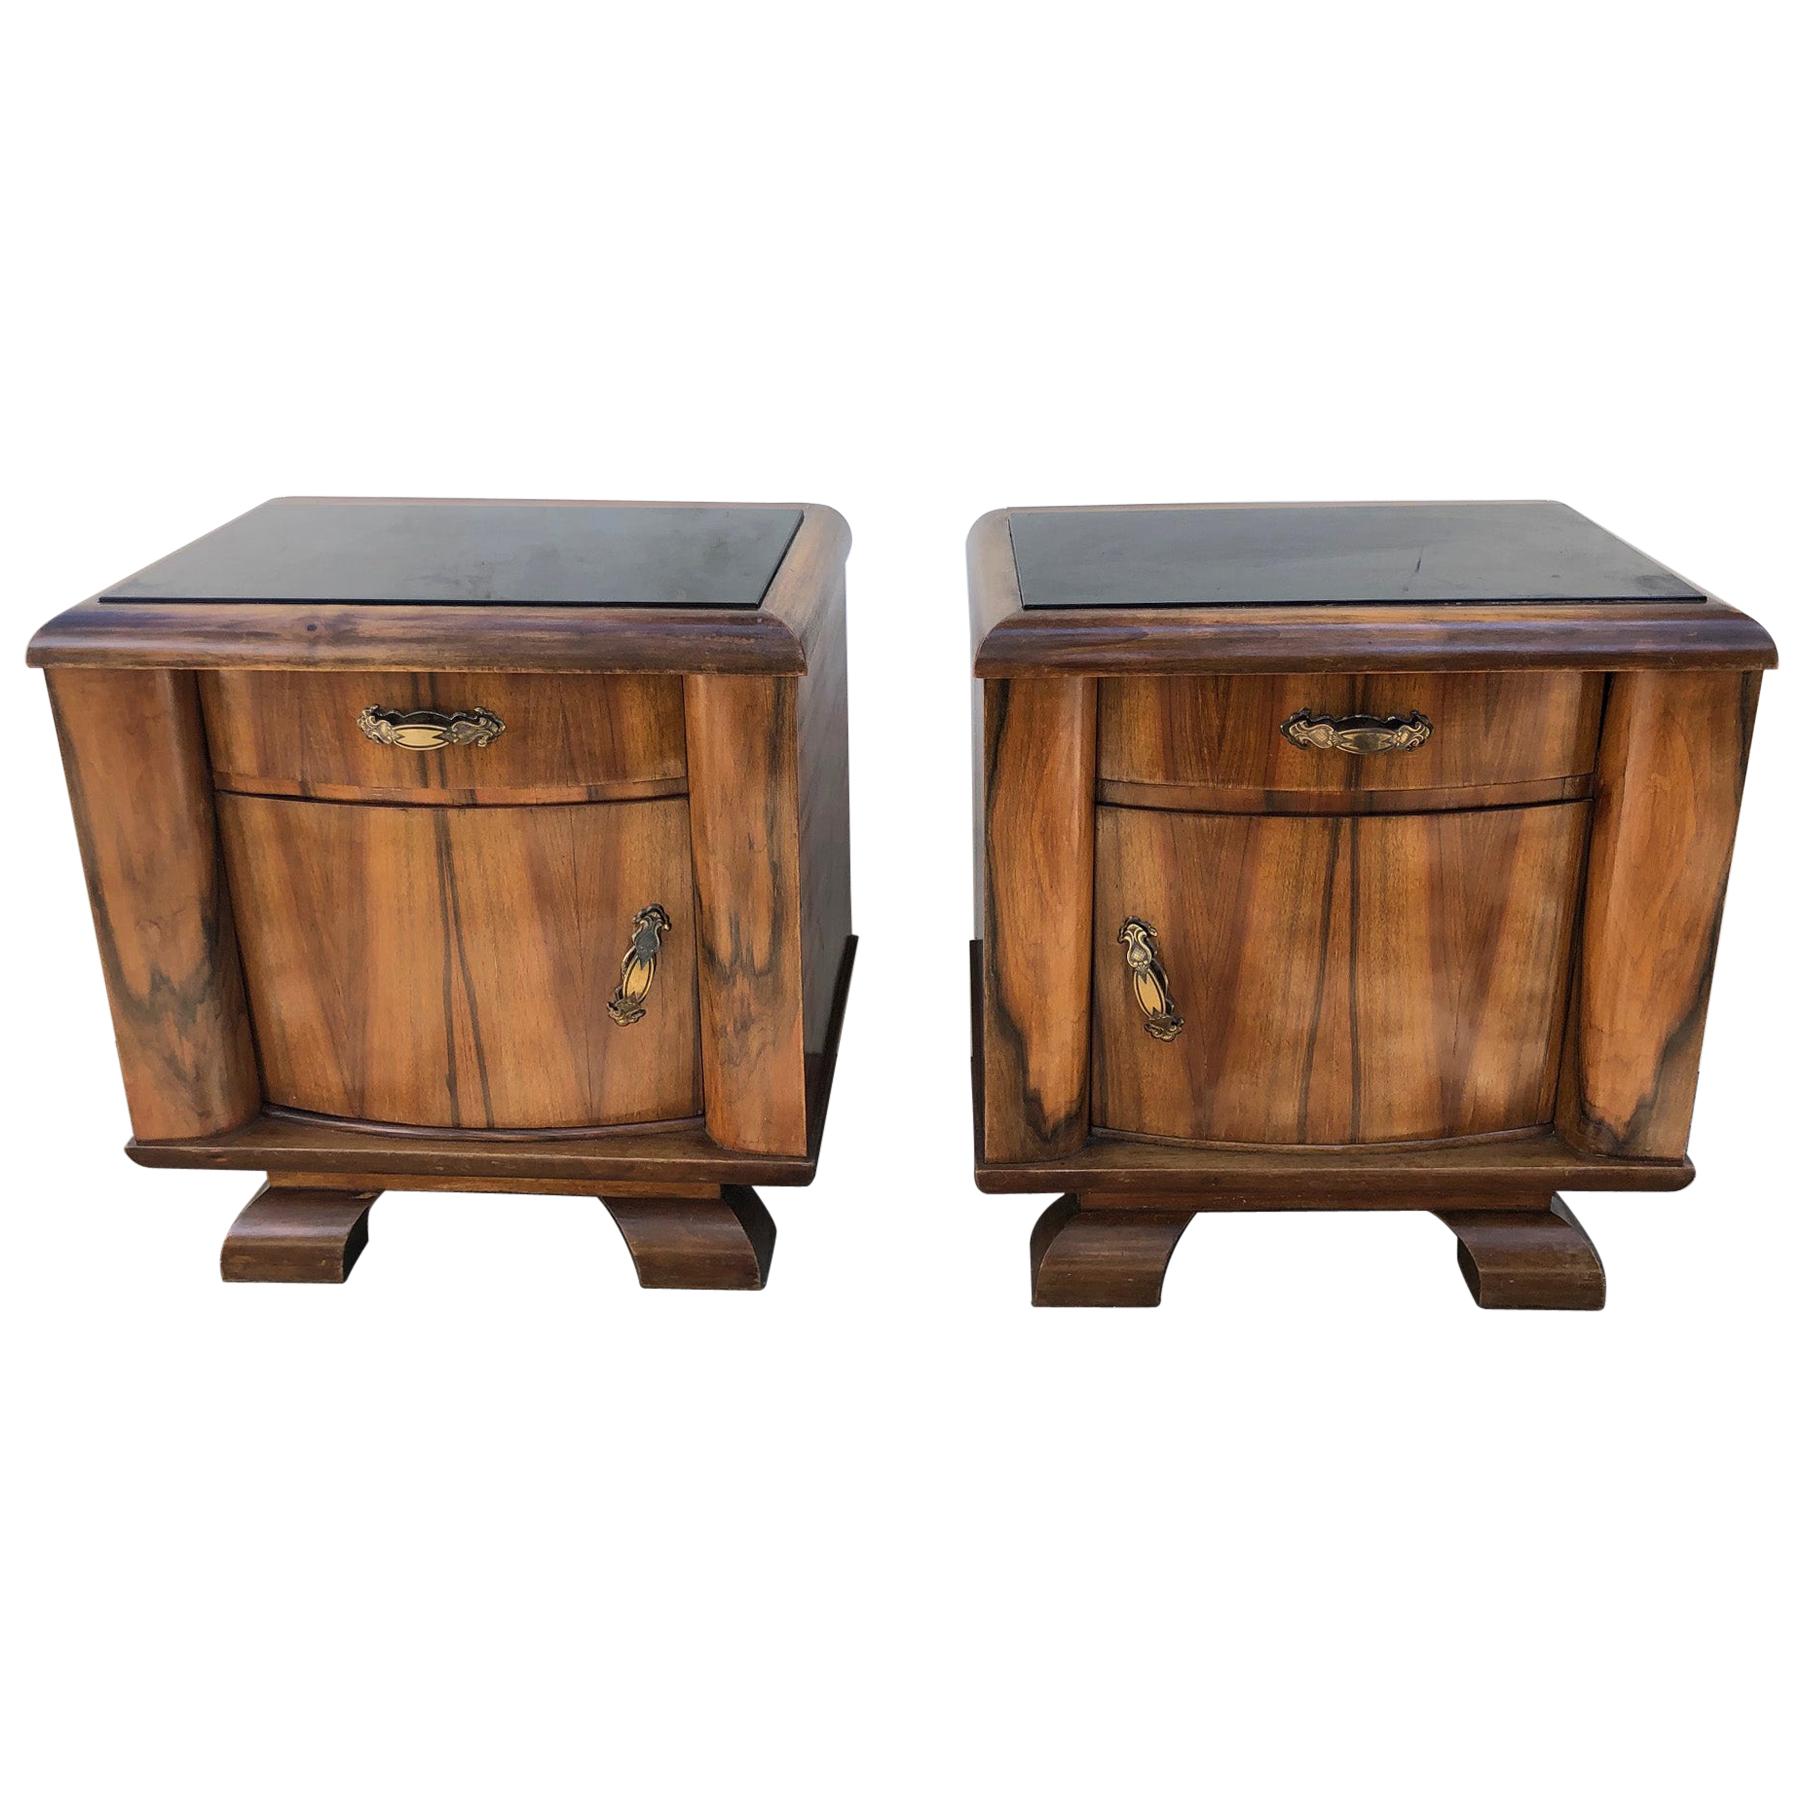 Pair of 1940's night stands in rosewood and walnut, honeycomb, natural color, original Italian design, black glass top.
From the same series in the shop there are ads for a dresser and a sideboard.

To find out the cost of transport to USA etc write